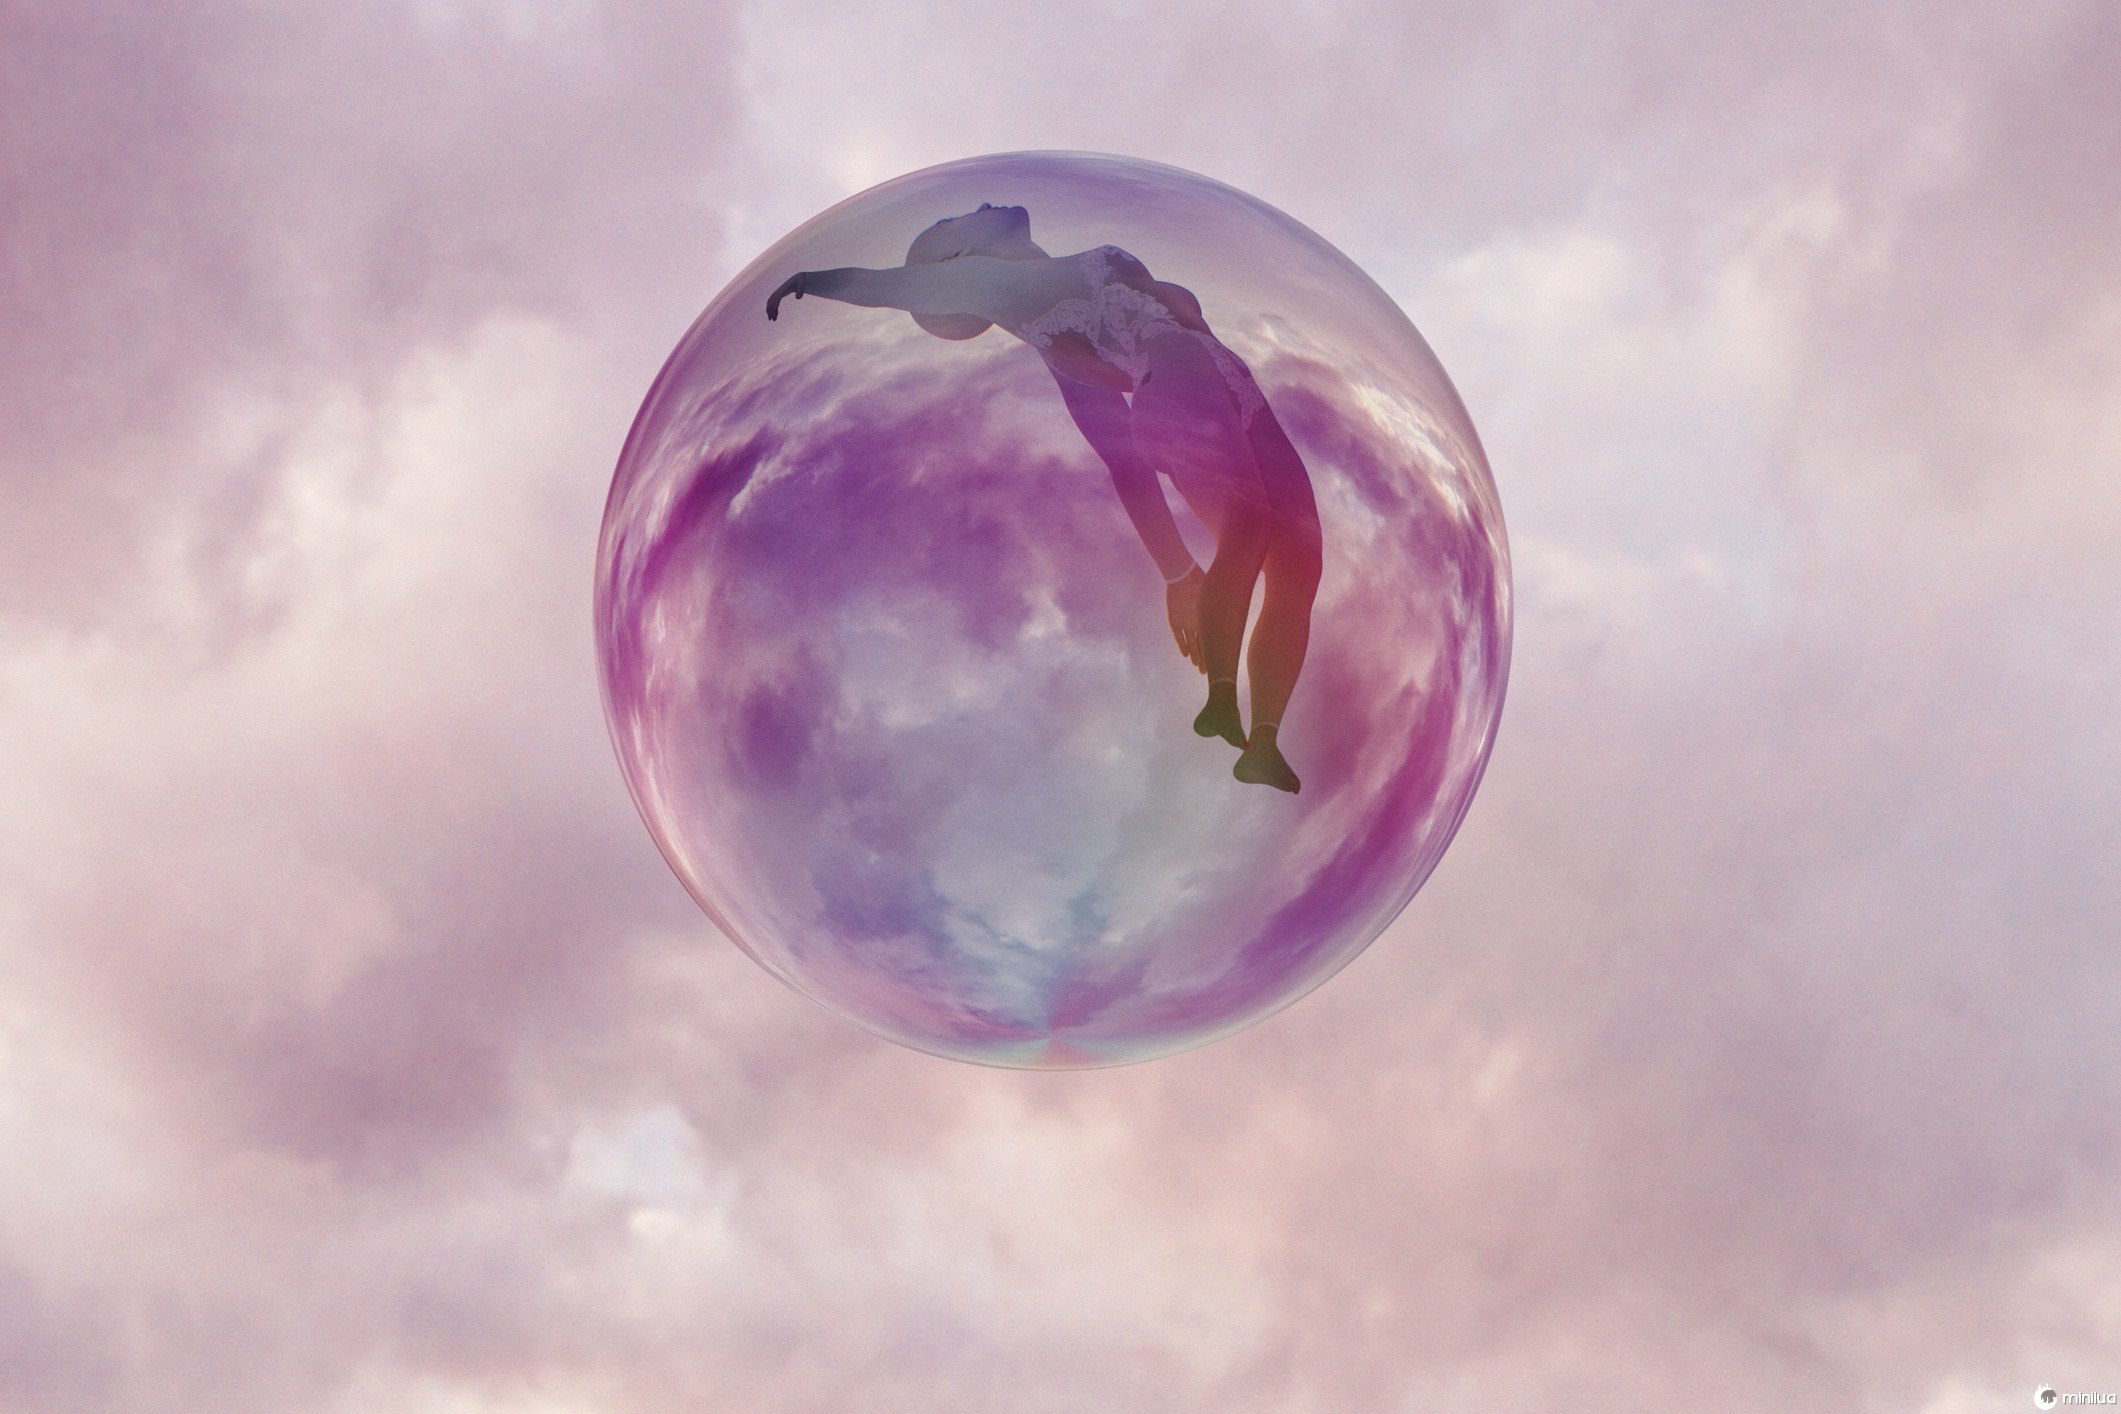 A photo of a woman inside a purplish marble floating in the sky.